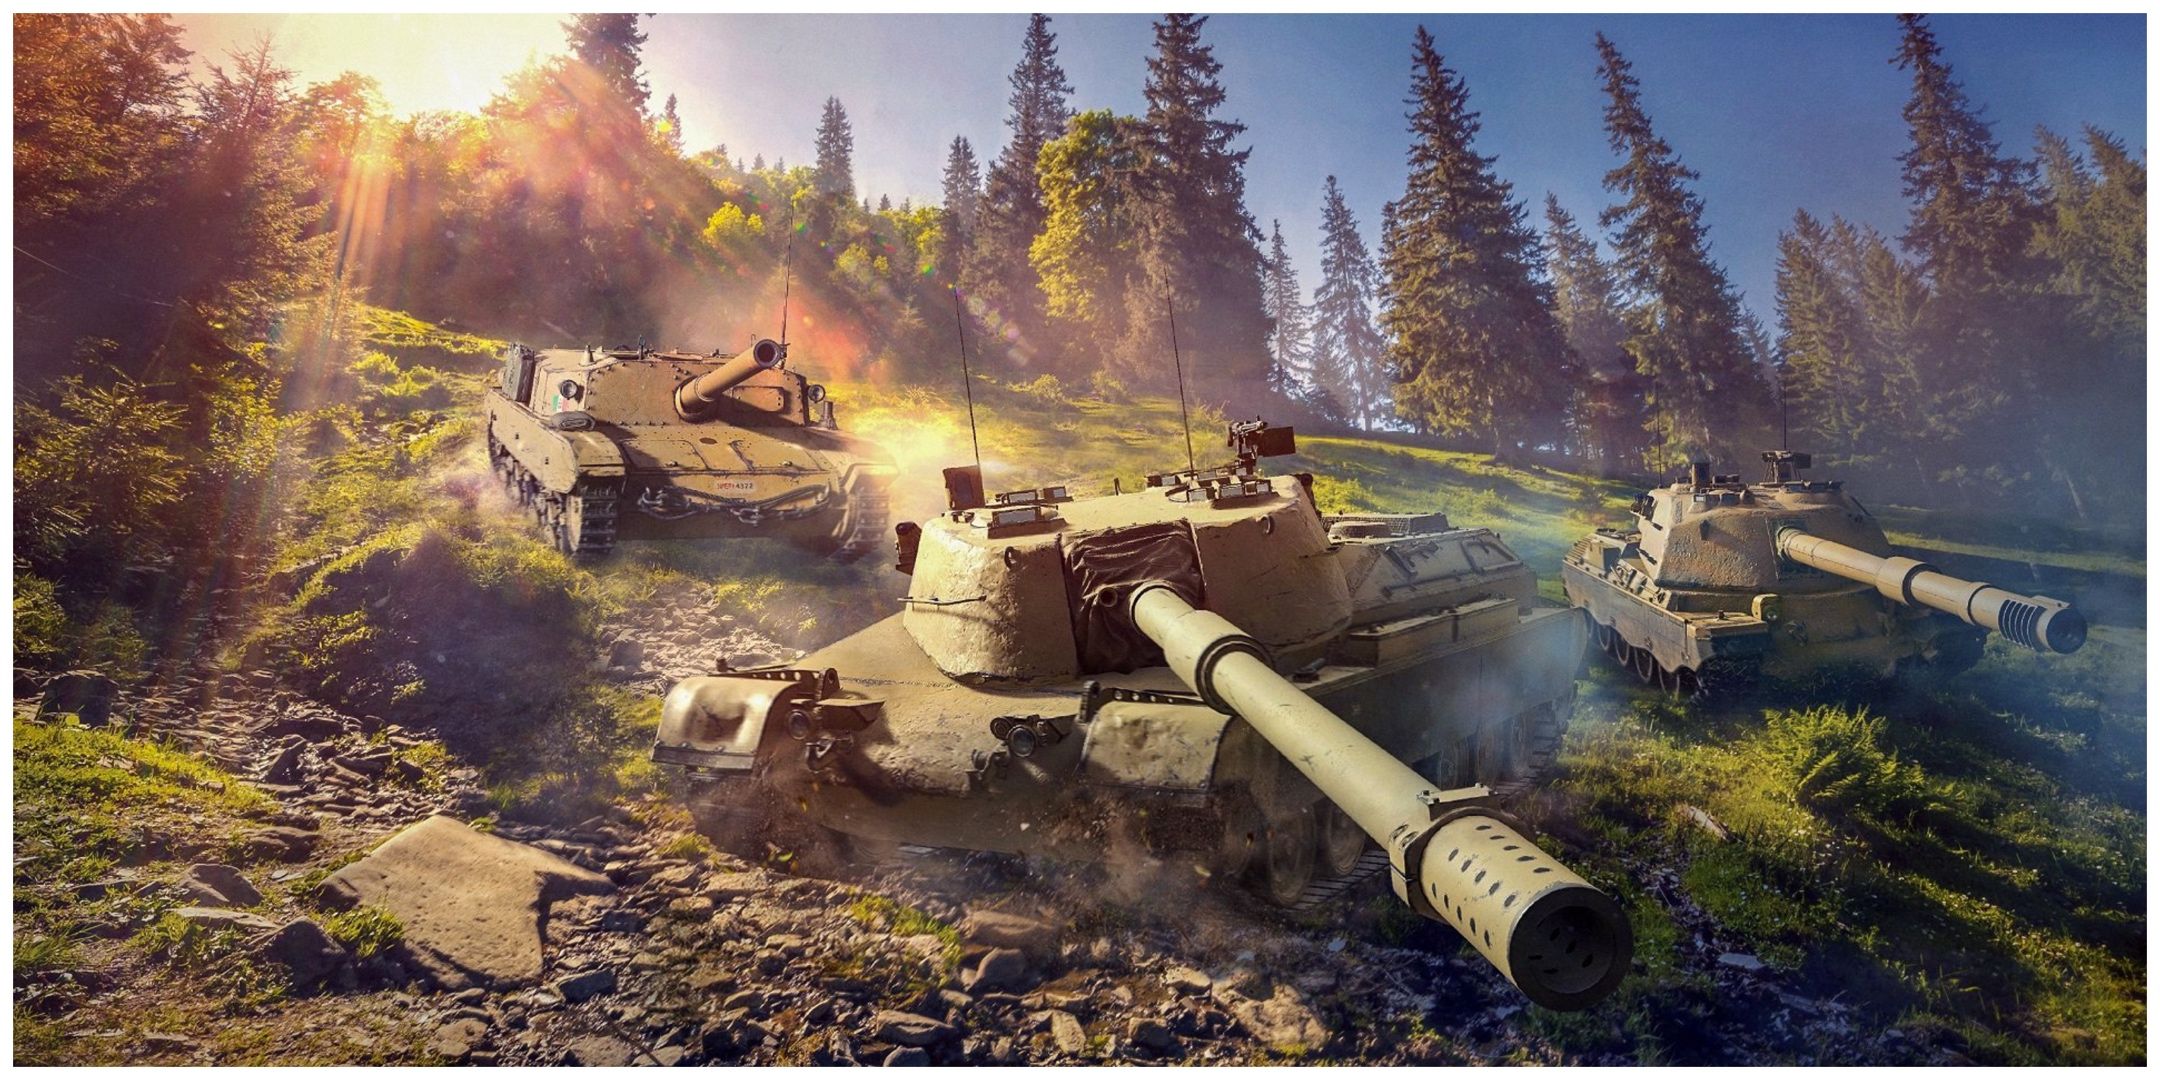 A closeup of three of the tanks available in World of Tanks against a forest background.